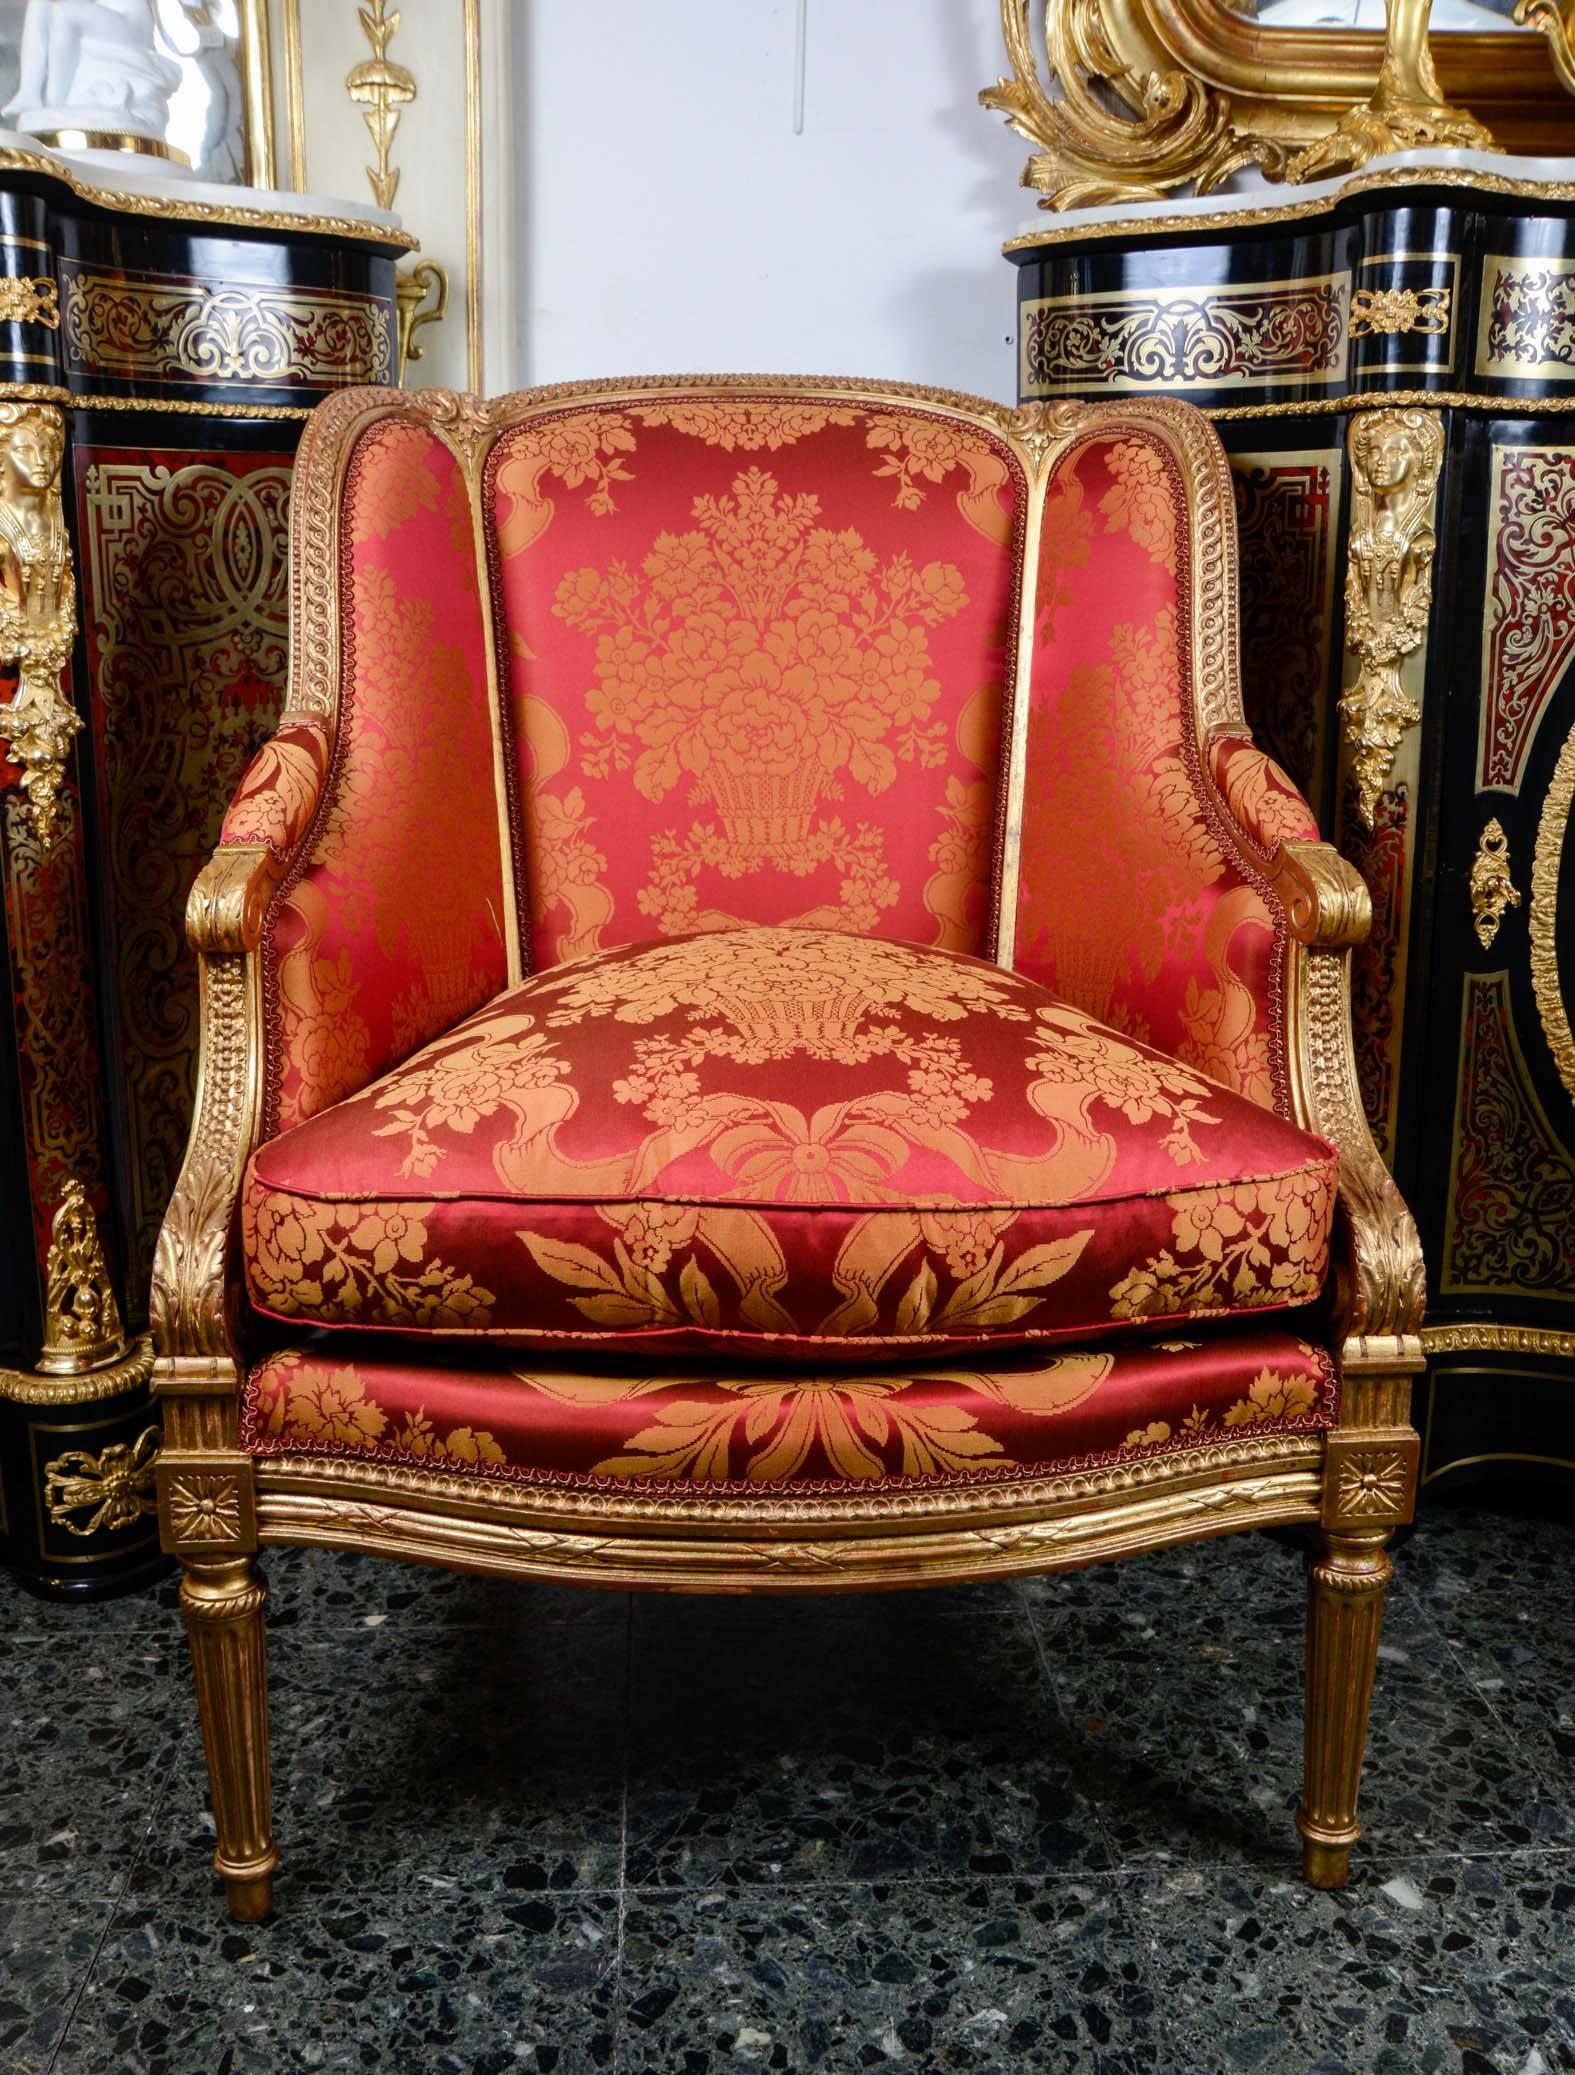 Set of 4 Louis XVI style gilded wood armchairs.
Covered with Lelièvre fabric.
Removable pillow.